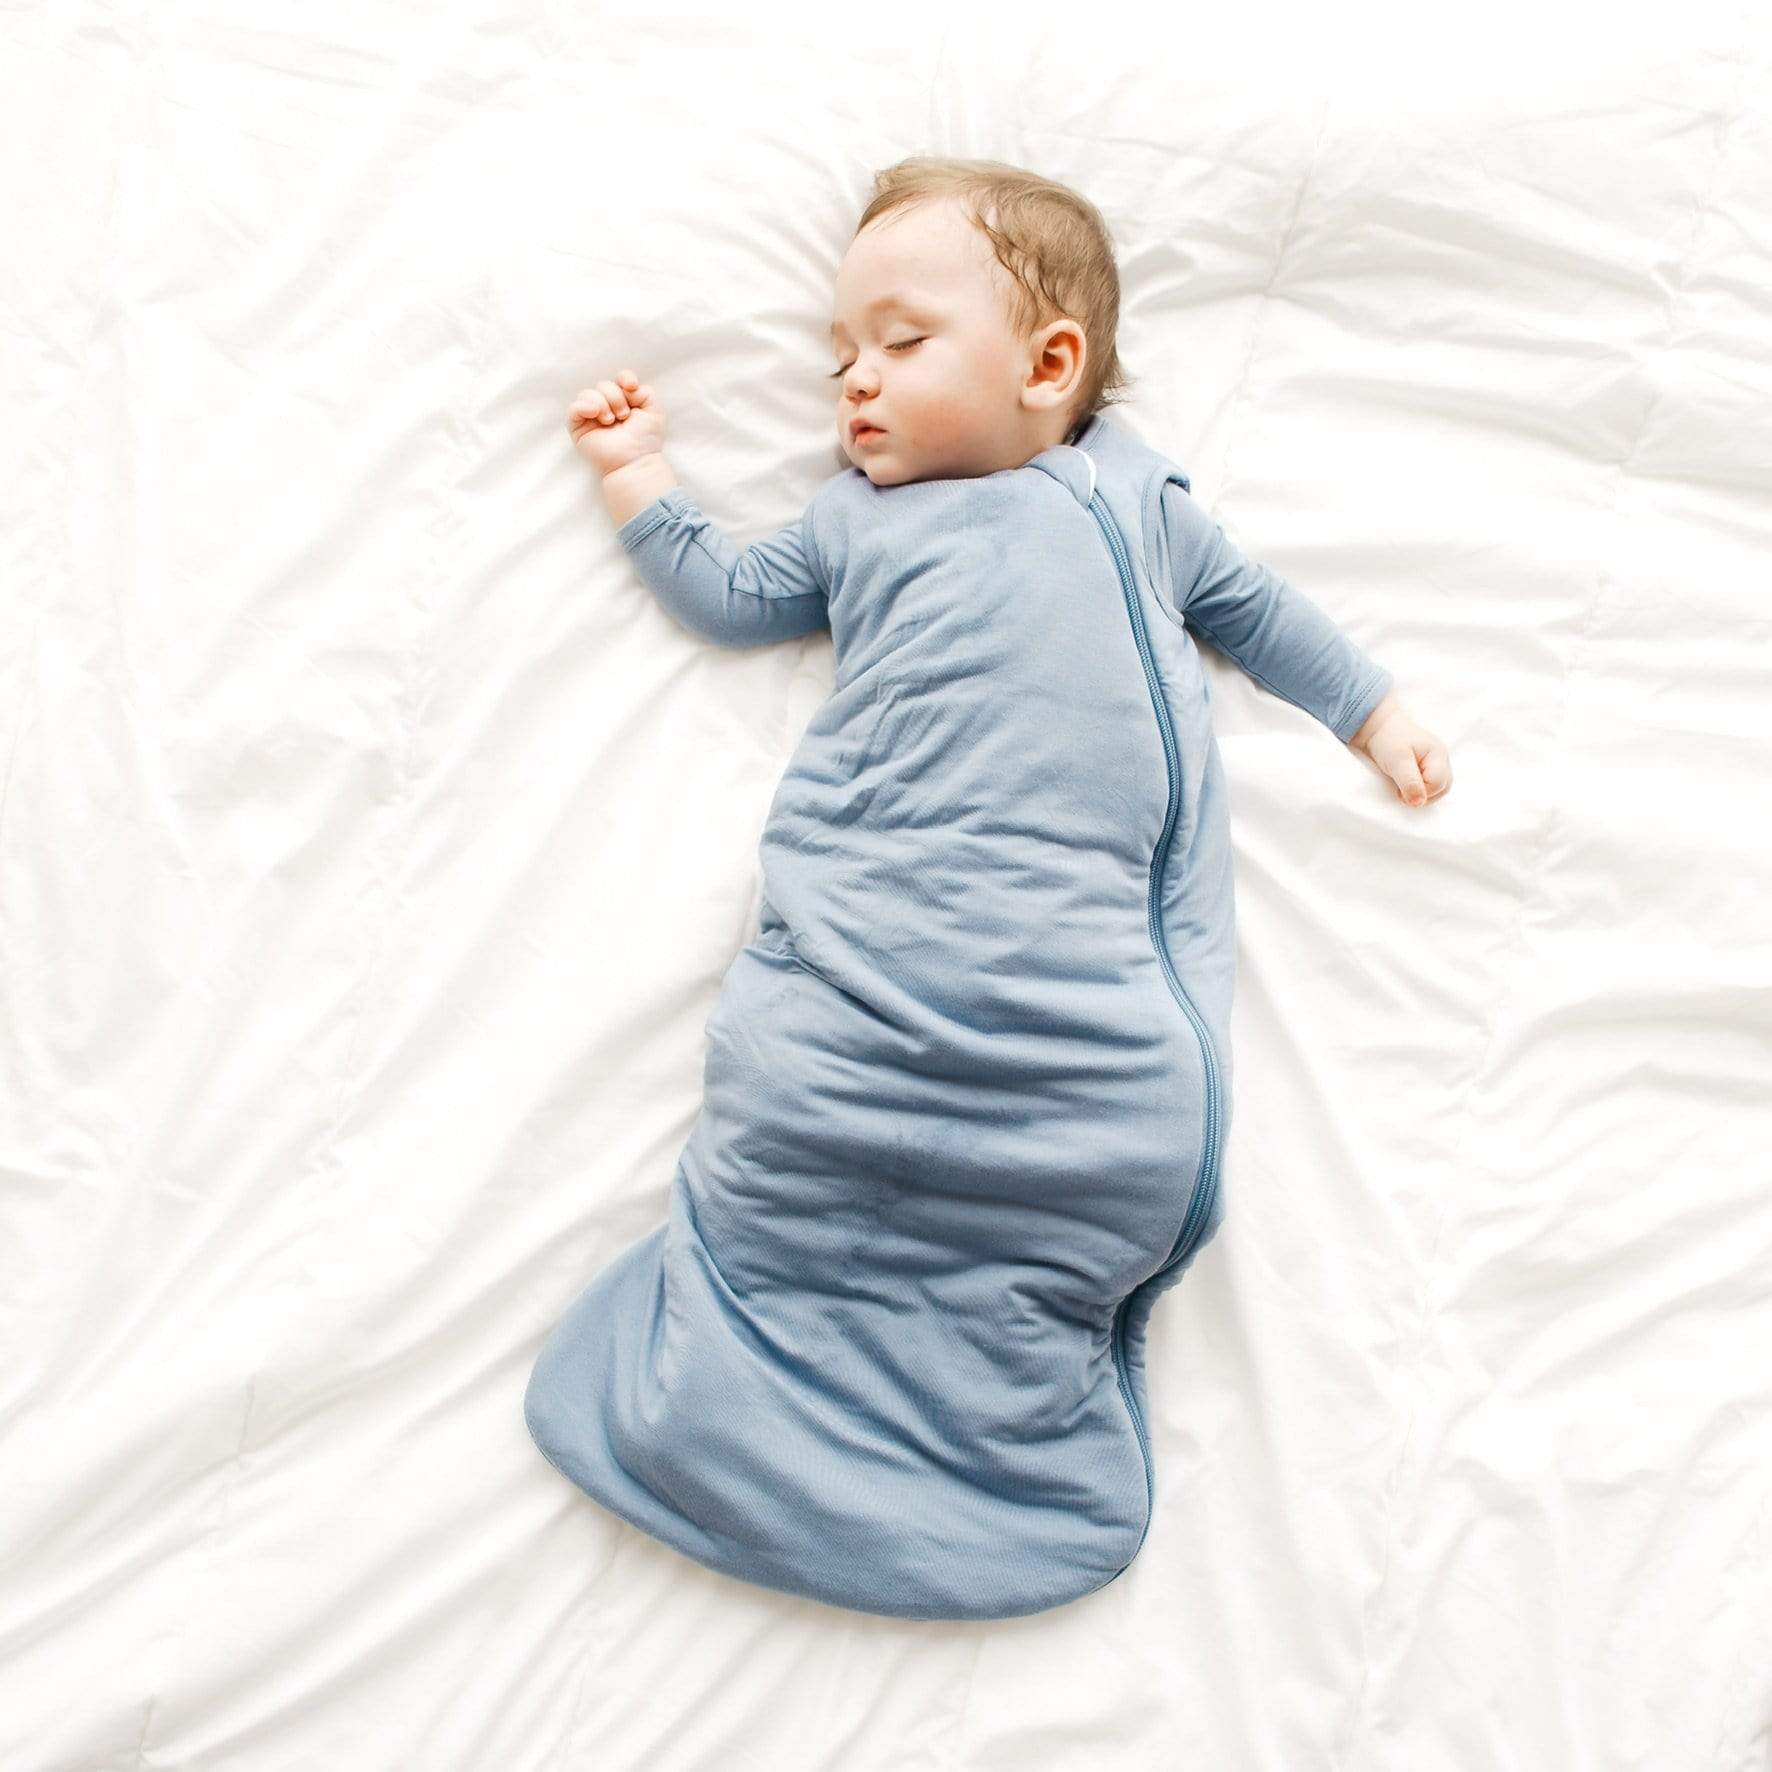 How to Put Baby to Sleep at Night: Identify and Utilize Sleep Cues